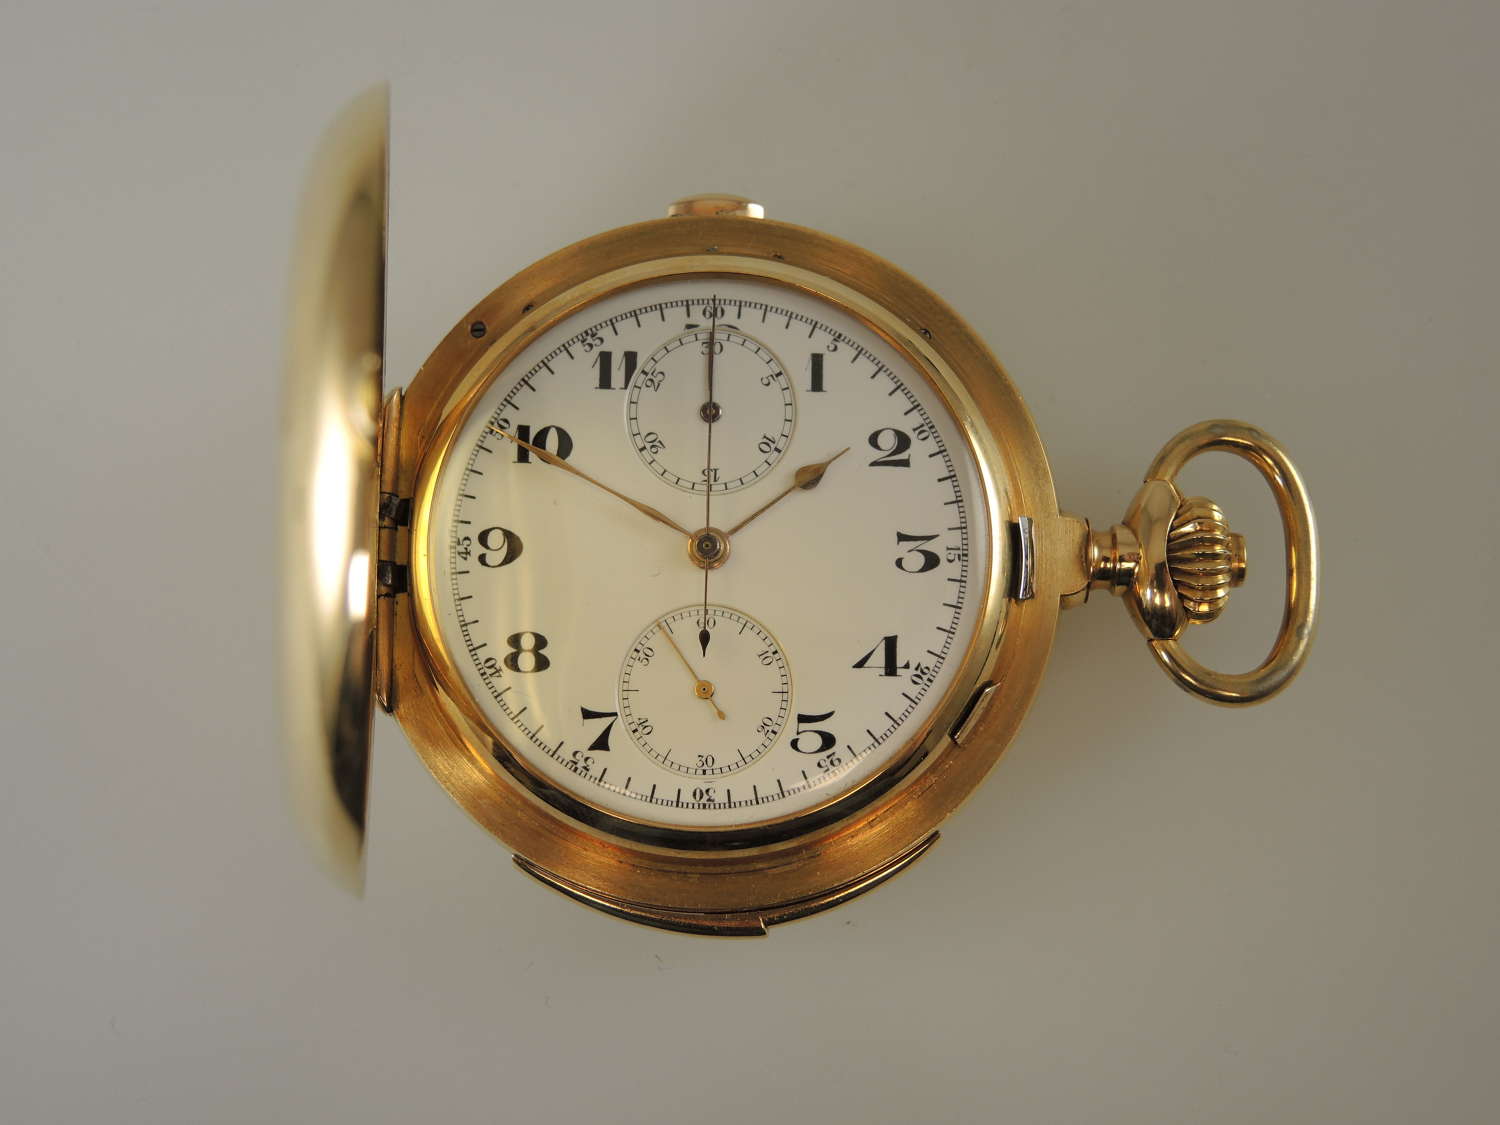 Massive 18K gold minute repeater chronograph pocket watch c1910